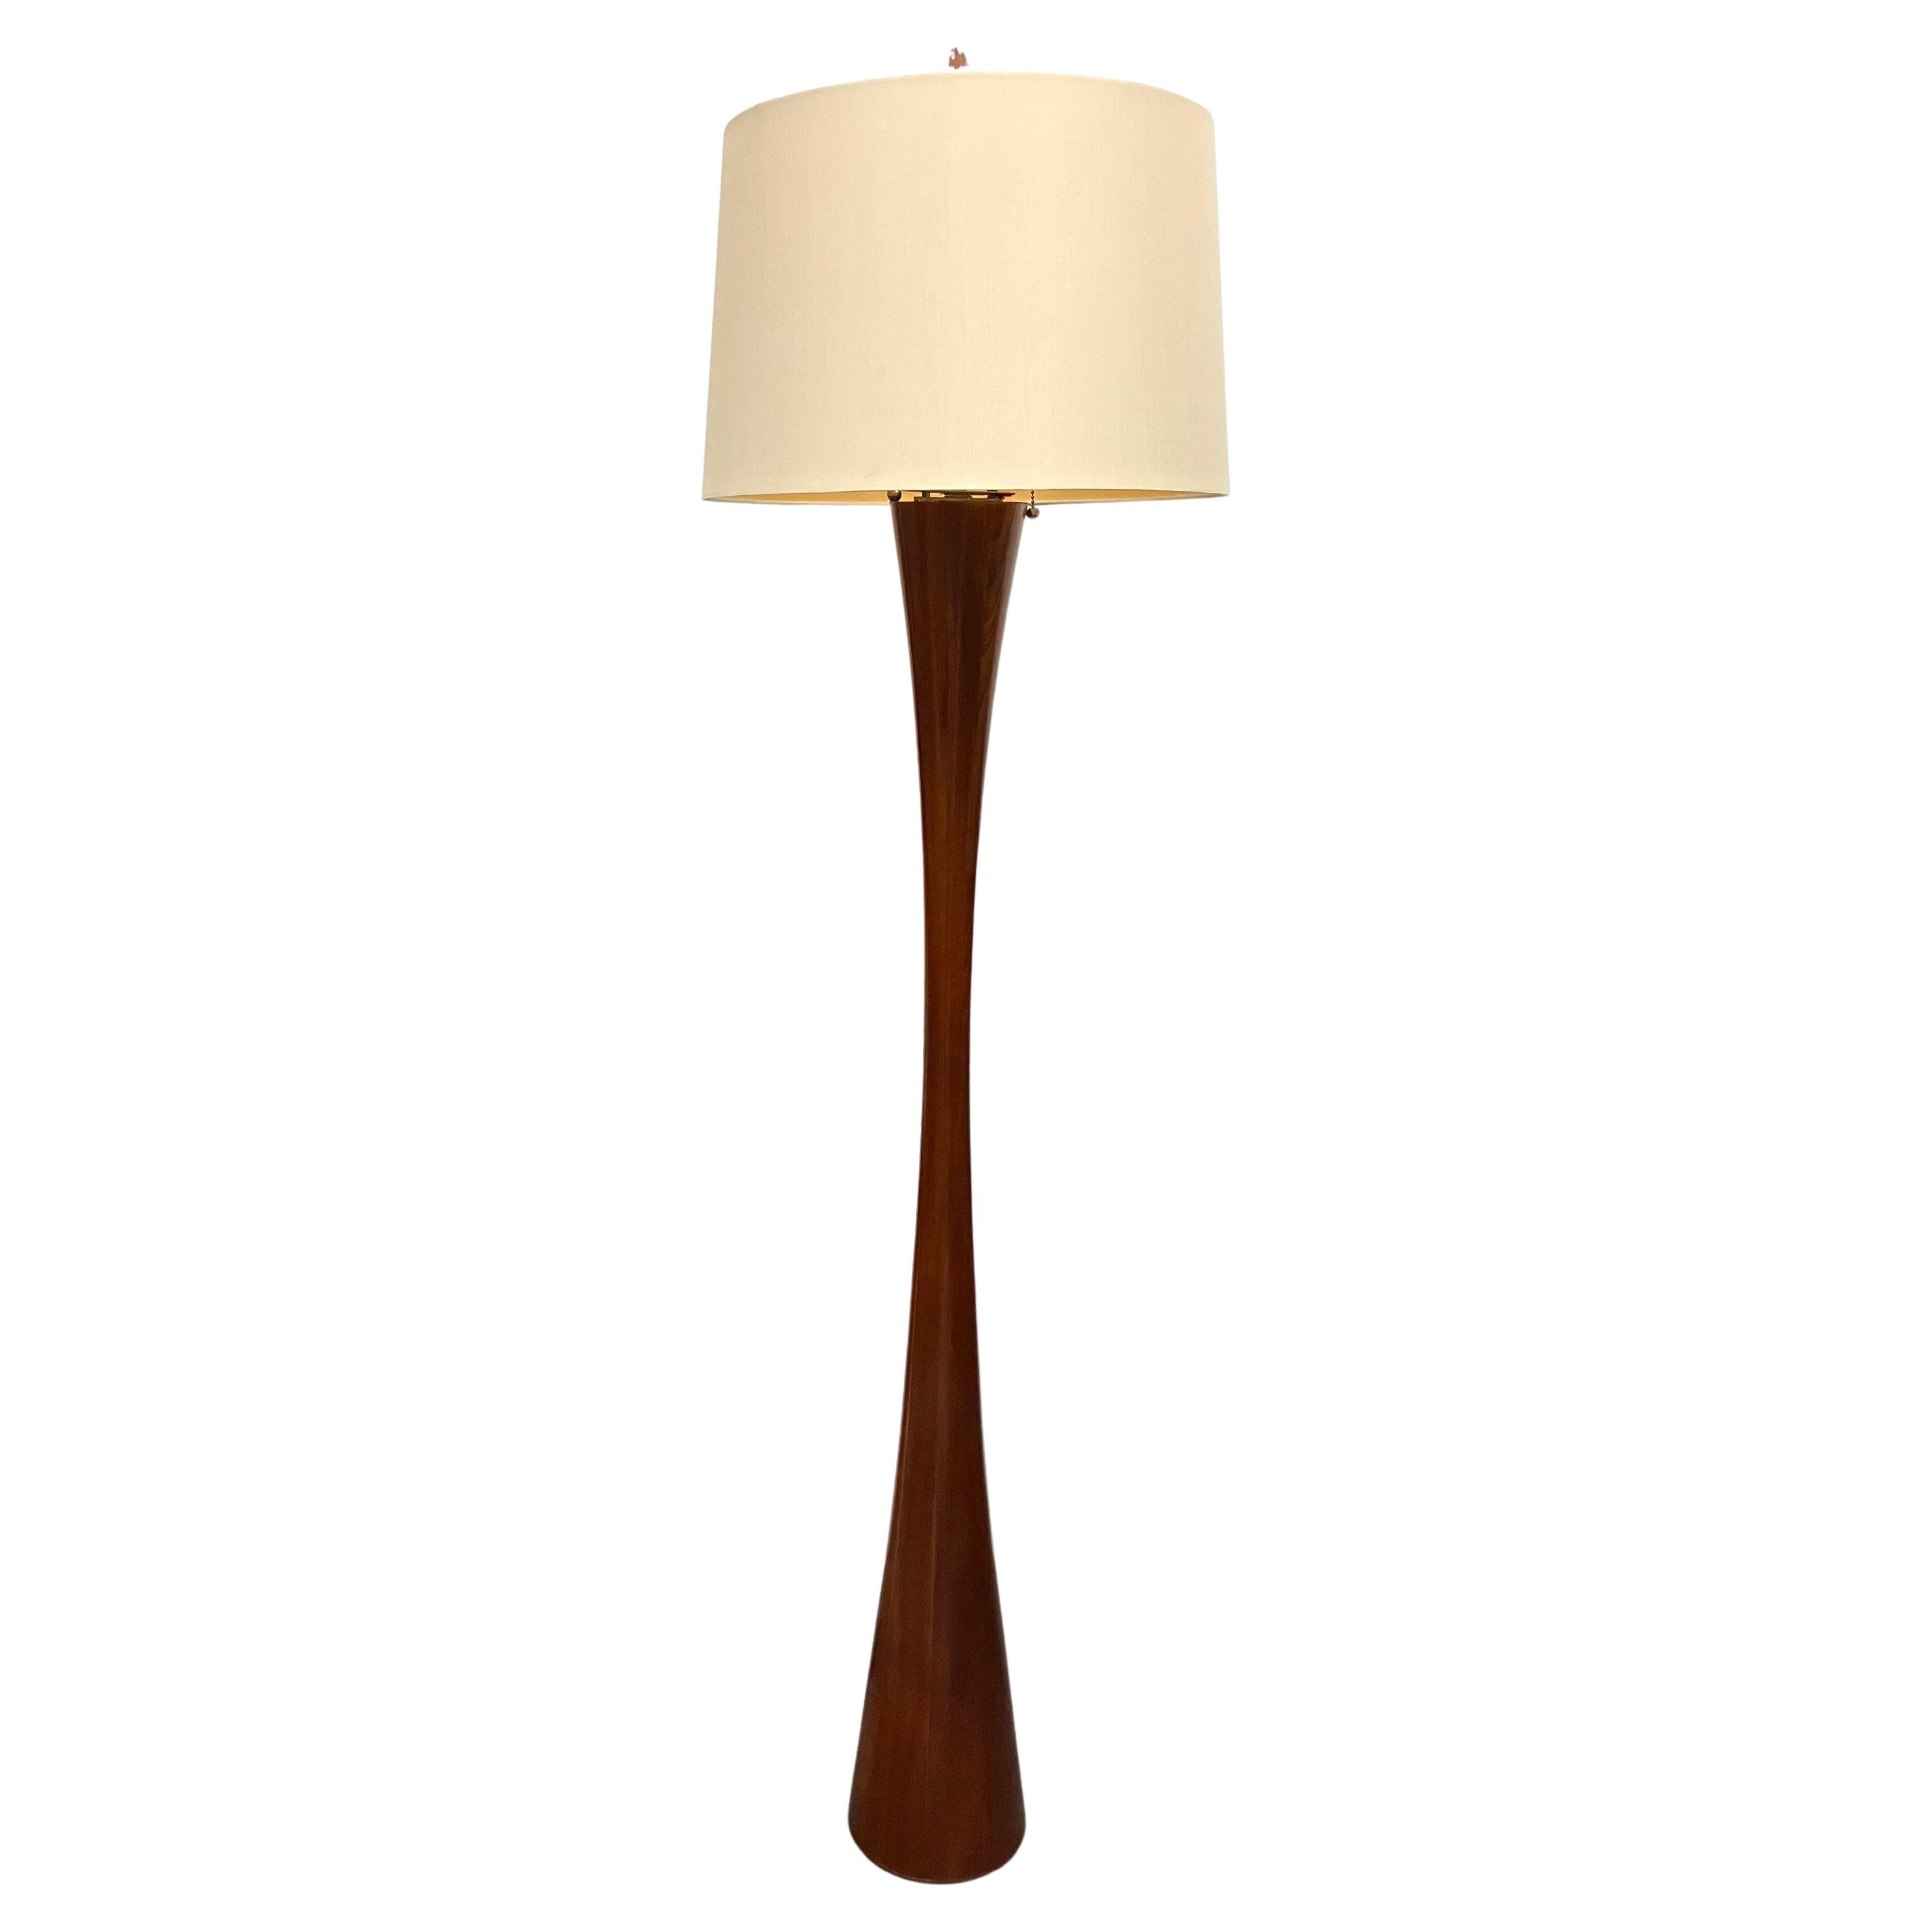 Solid staved mahogany in a sensual hourglass form. The J2 model was designed to accommodate a fabric shade. Produced and distributed by Disderot, Paris. Shade not included.